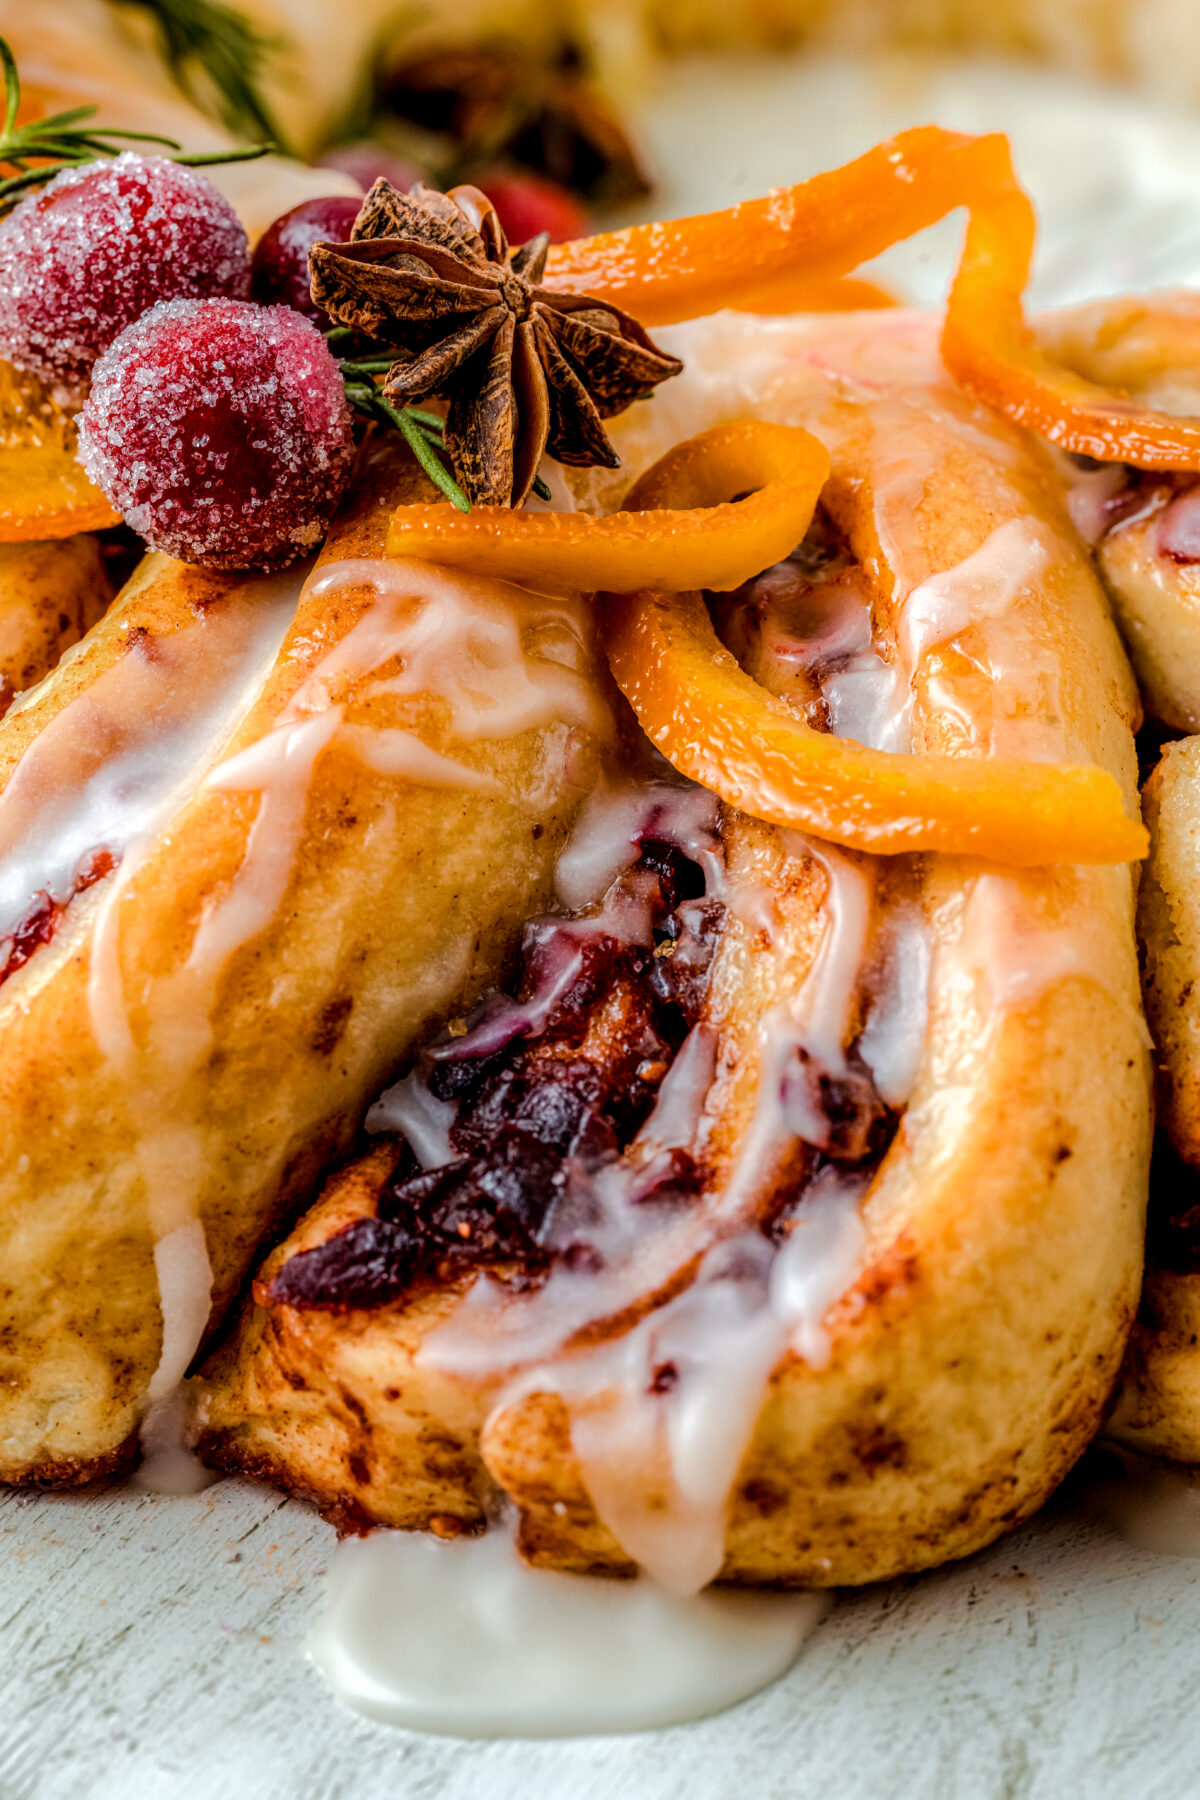 Make your holiday season extra special with this delicious Cranberry Orange Cinnamon Roll Wreath. It's sure to be a hit at any holiday party!